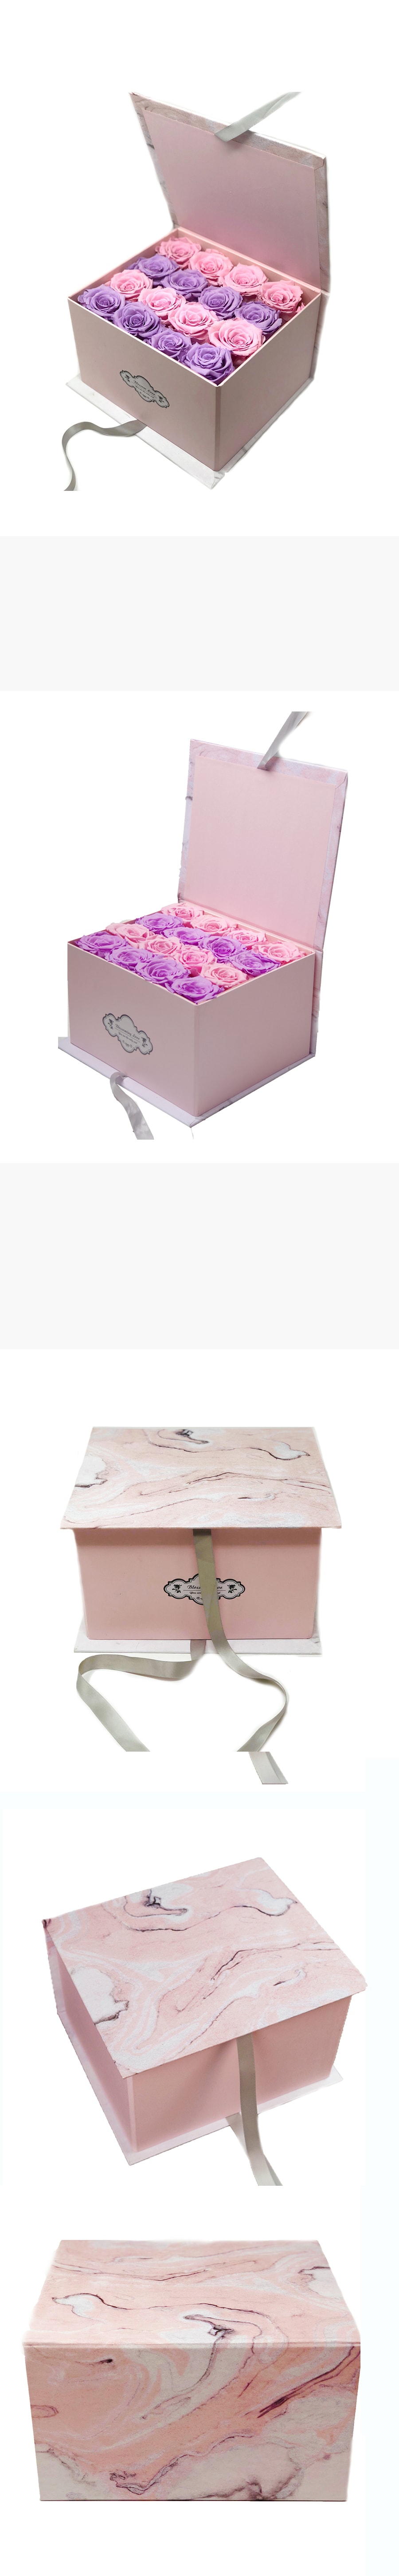 LUXURY PINK MARBLE DESIGN BOX - PINK AND PURPLE ROSES